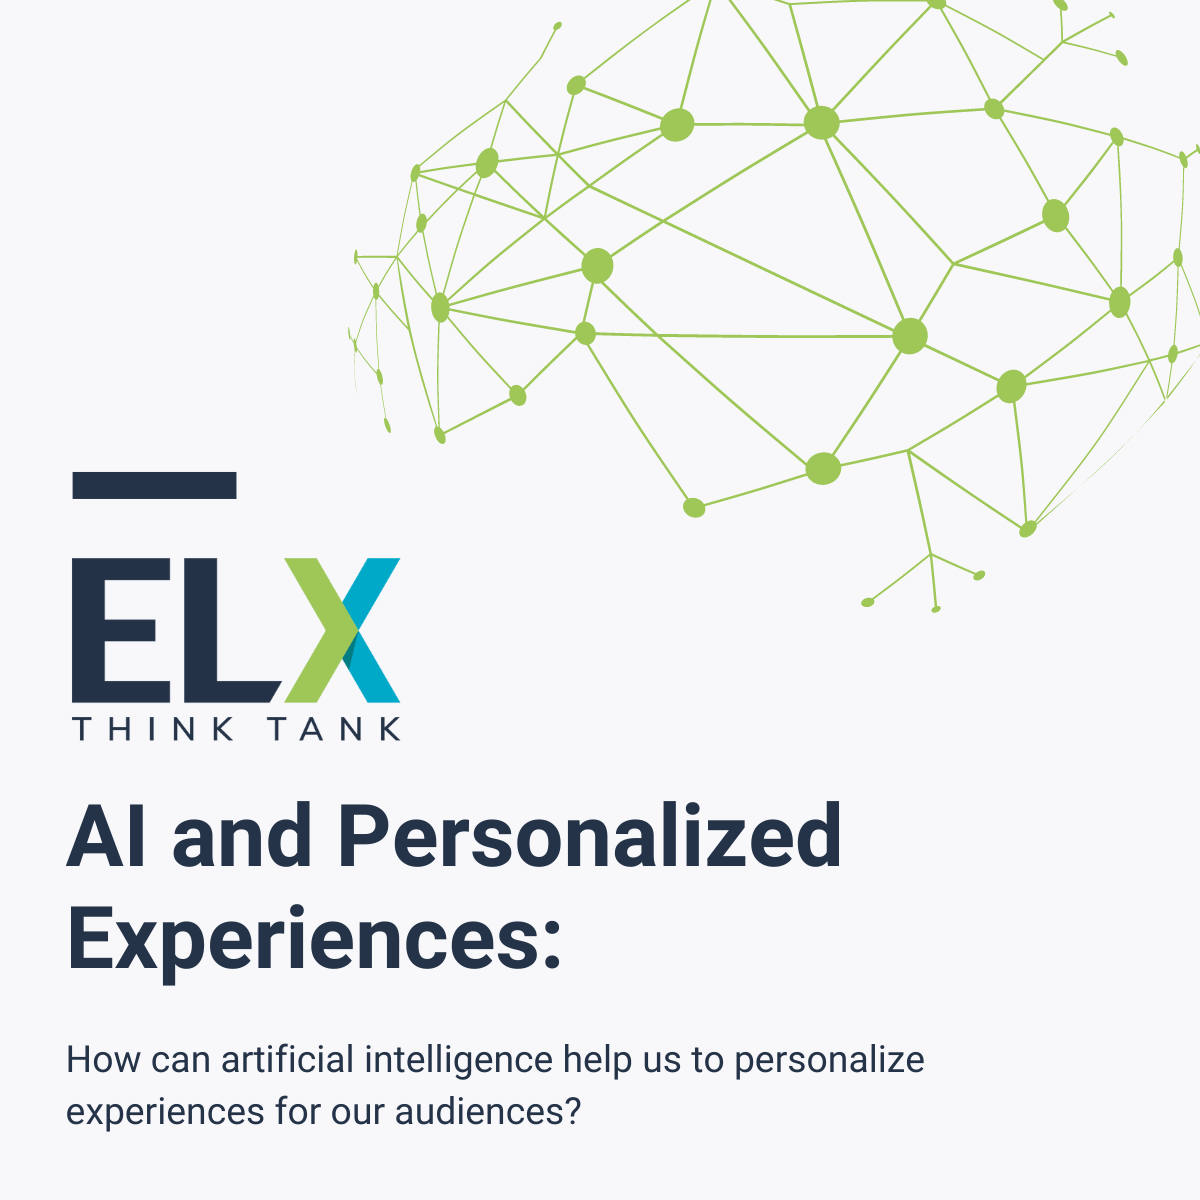 ELX Think Tank: AI in Personalized Experiences